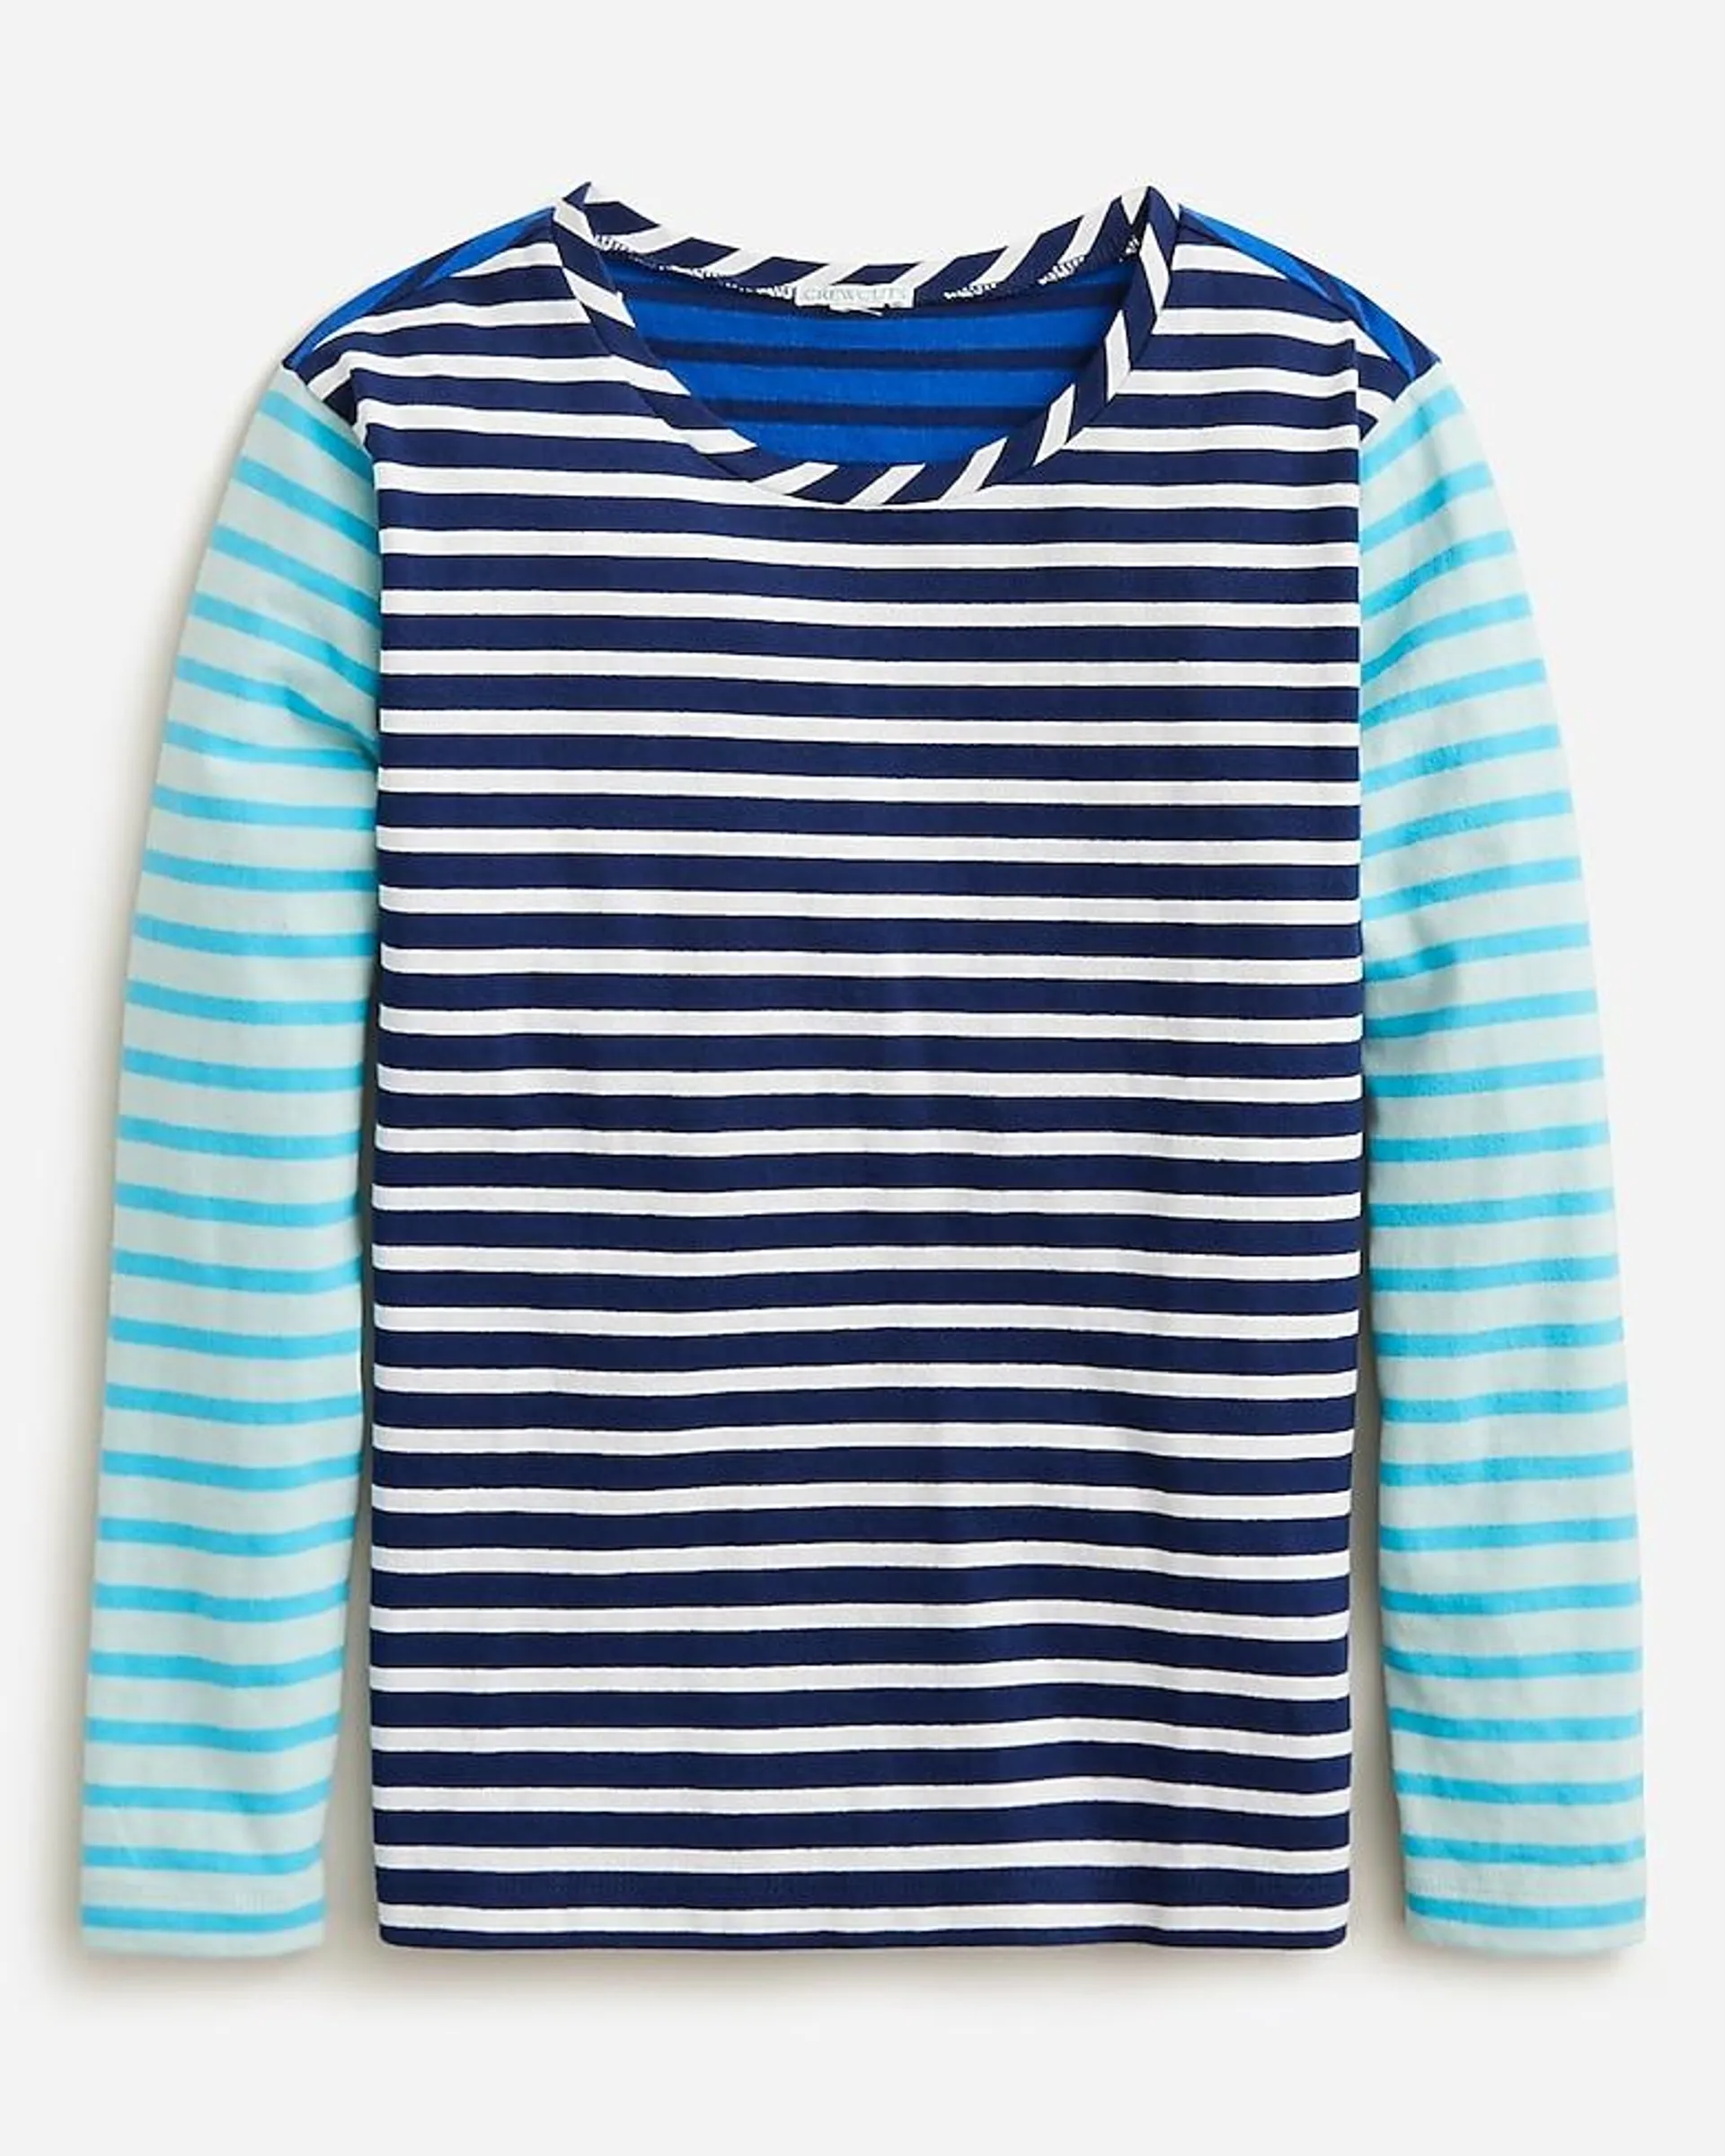 KID by crewcuts T-shirt in mixed stripe